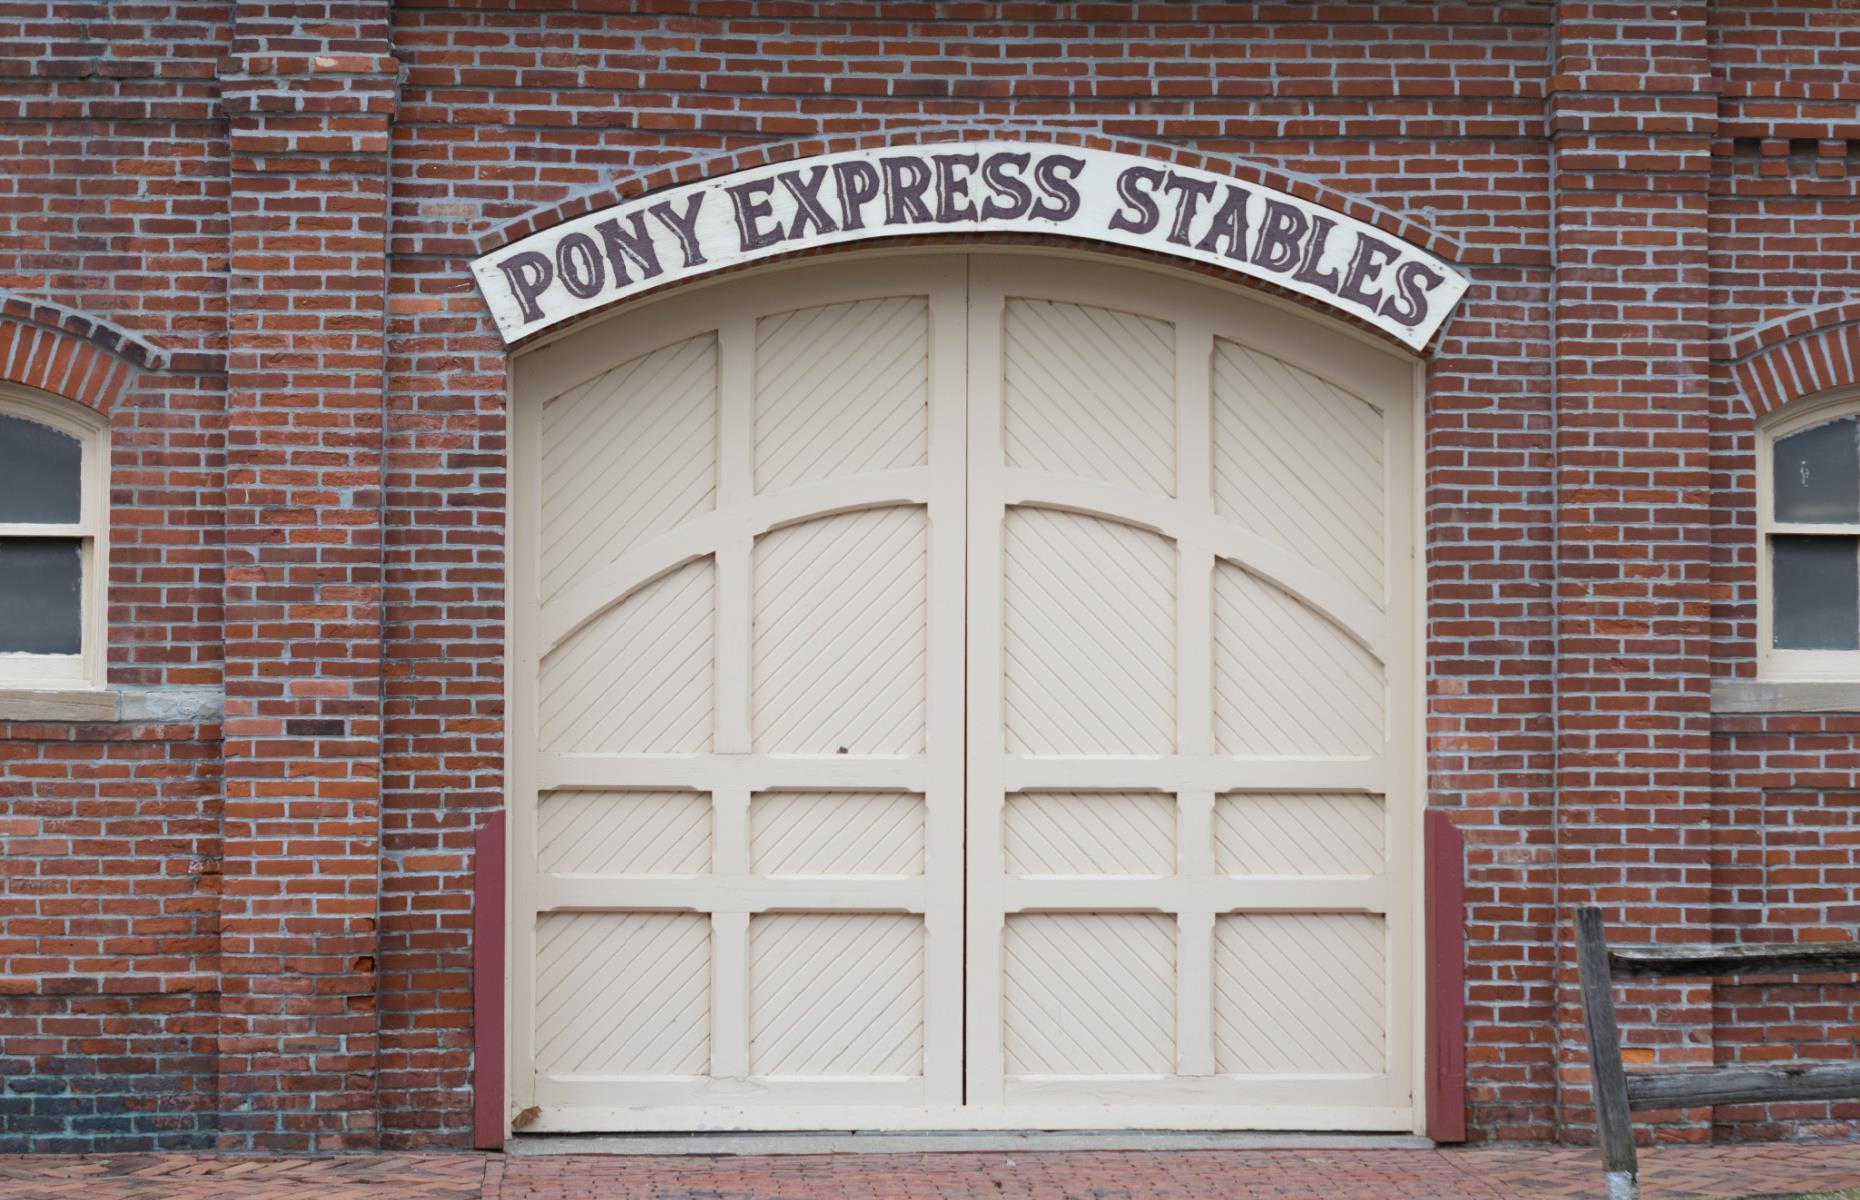 <p>There’s a romantic appeal to the Pony Express, America’s horse-run pre-telegraph communications system, which only ran for a mere 18 months in the mid-19th century. <a href="https://www.nps.gov/poex/planyourvisit/pony-express-stable.htm">This building in Missouri</a>, also known as Pike’s Peak Stables, was where the horses lived and slept when they weren’t on their way to California to deliver the mail. The original wooden building was replaced by brick in 1888, but some of the original structure was reused. Today it stands as a museum and memorial.</p>